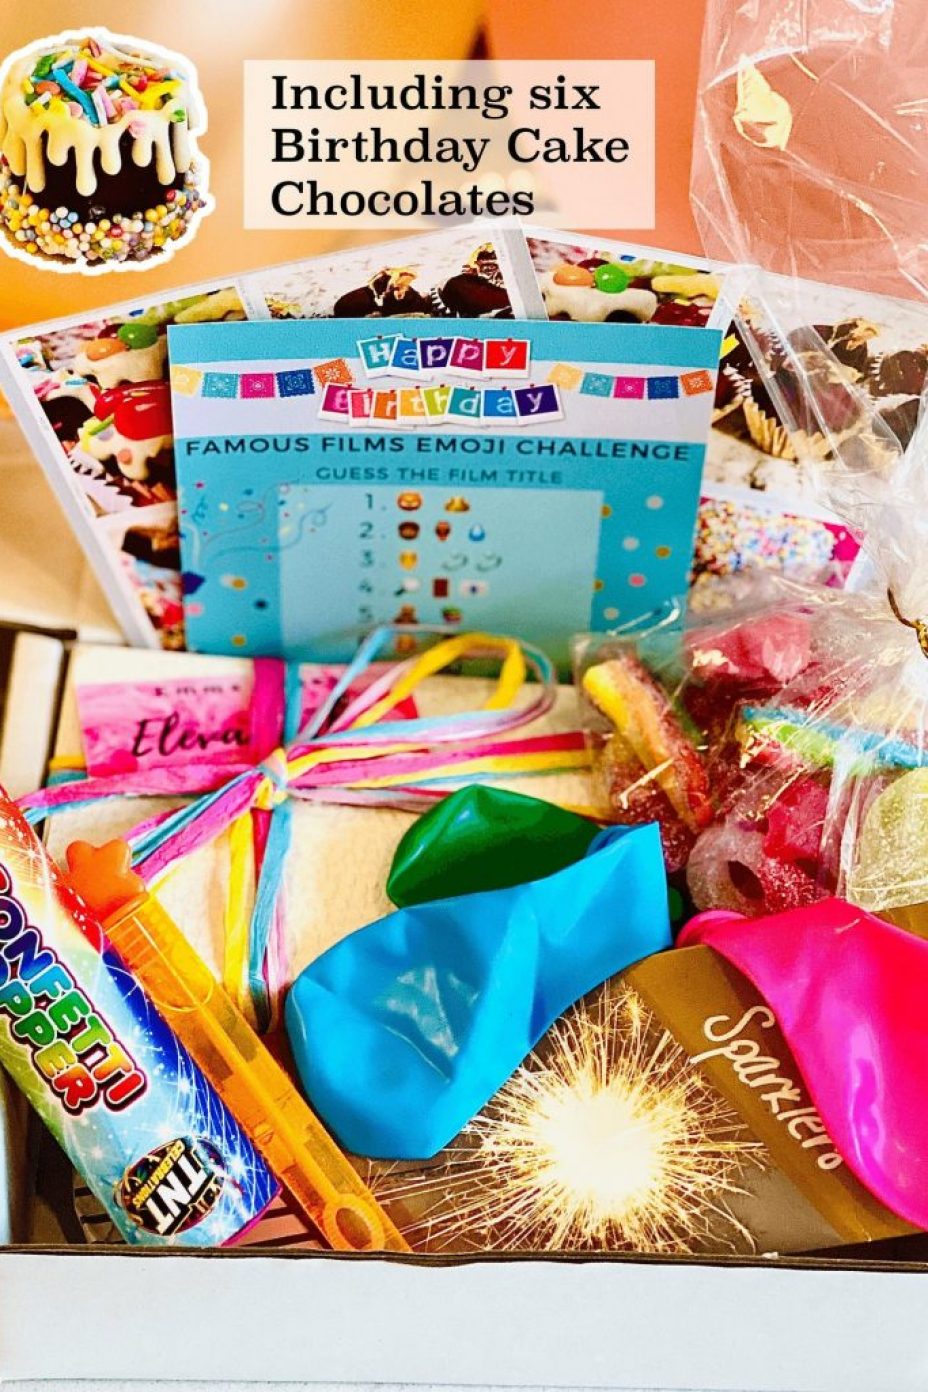 Vegan Birthday Hamper, filled with artisan birthday cake chocolates, vegan sweets, games, balloons, sparklers and bubbles - everything to make their day special